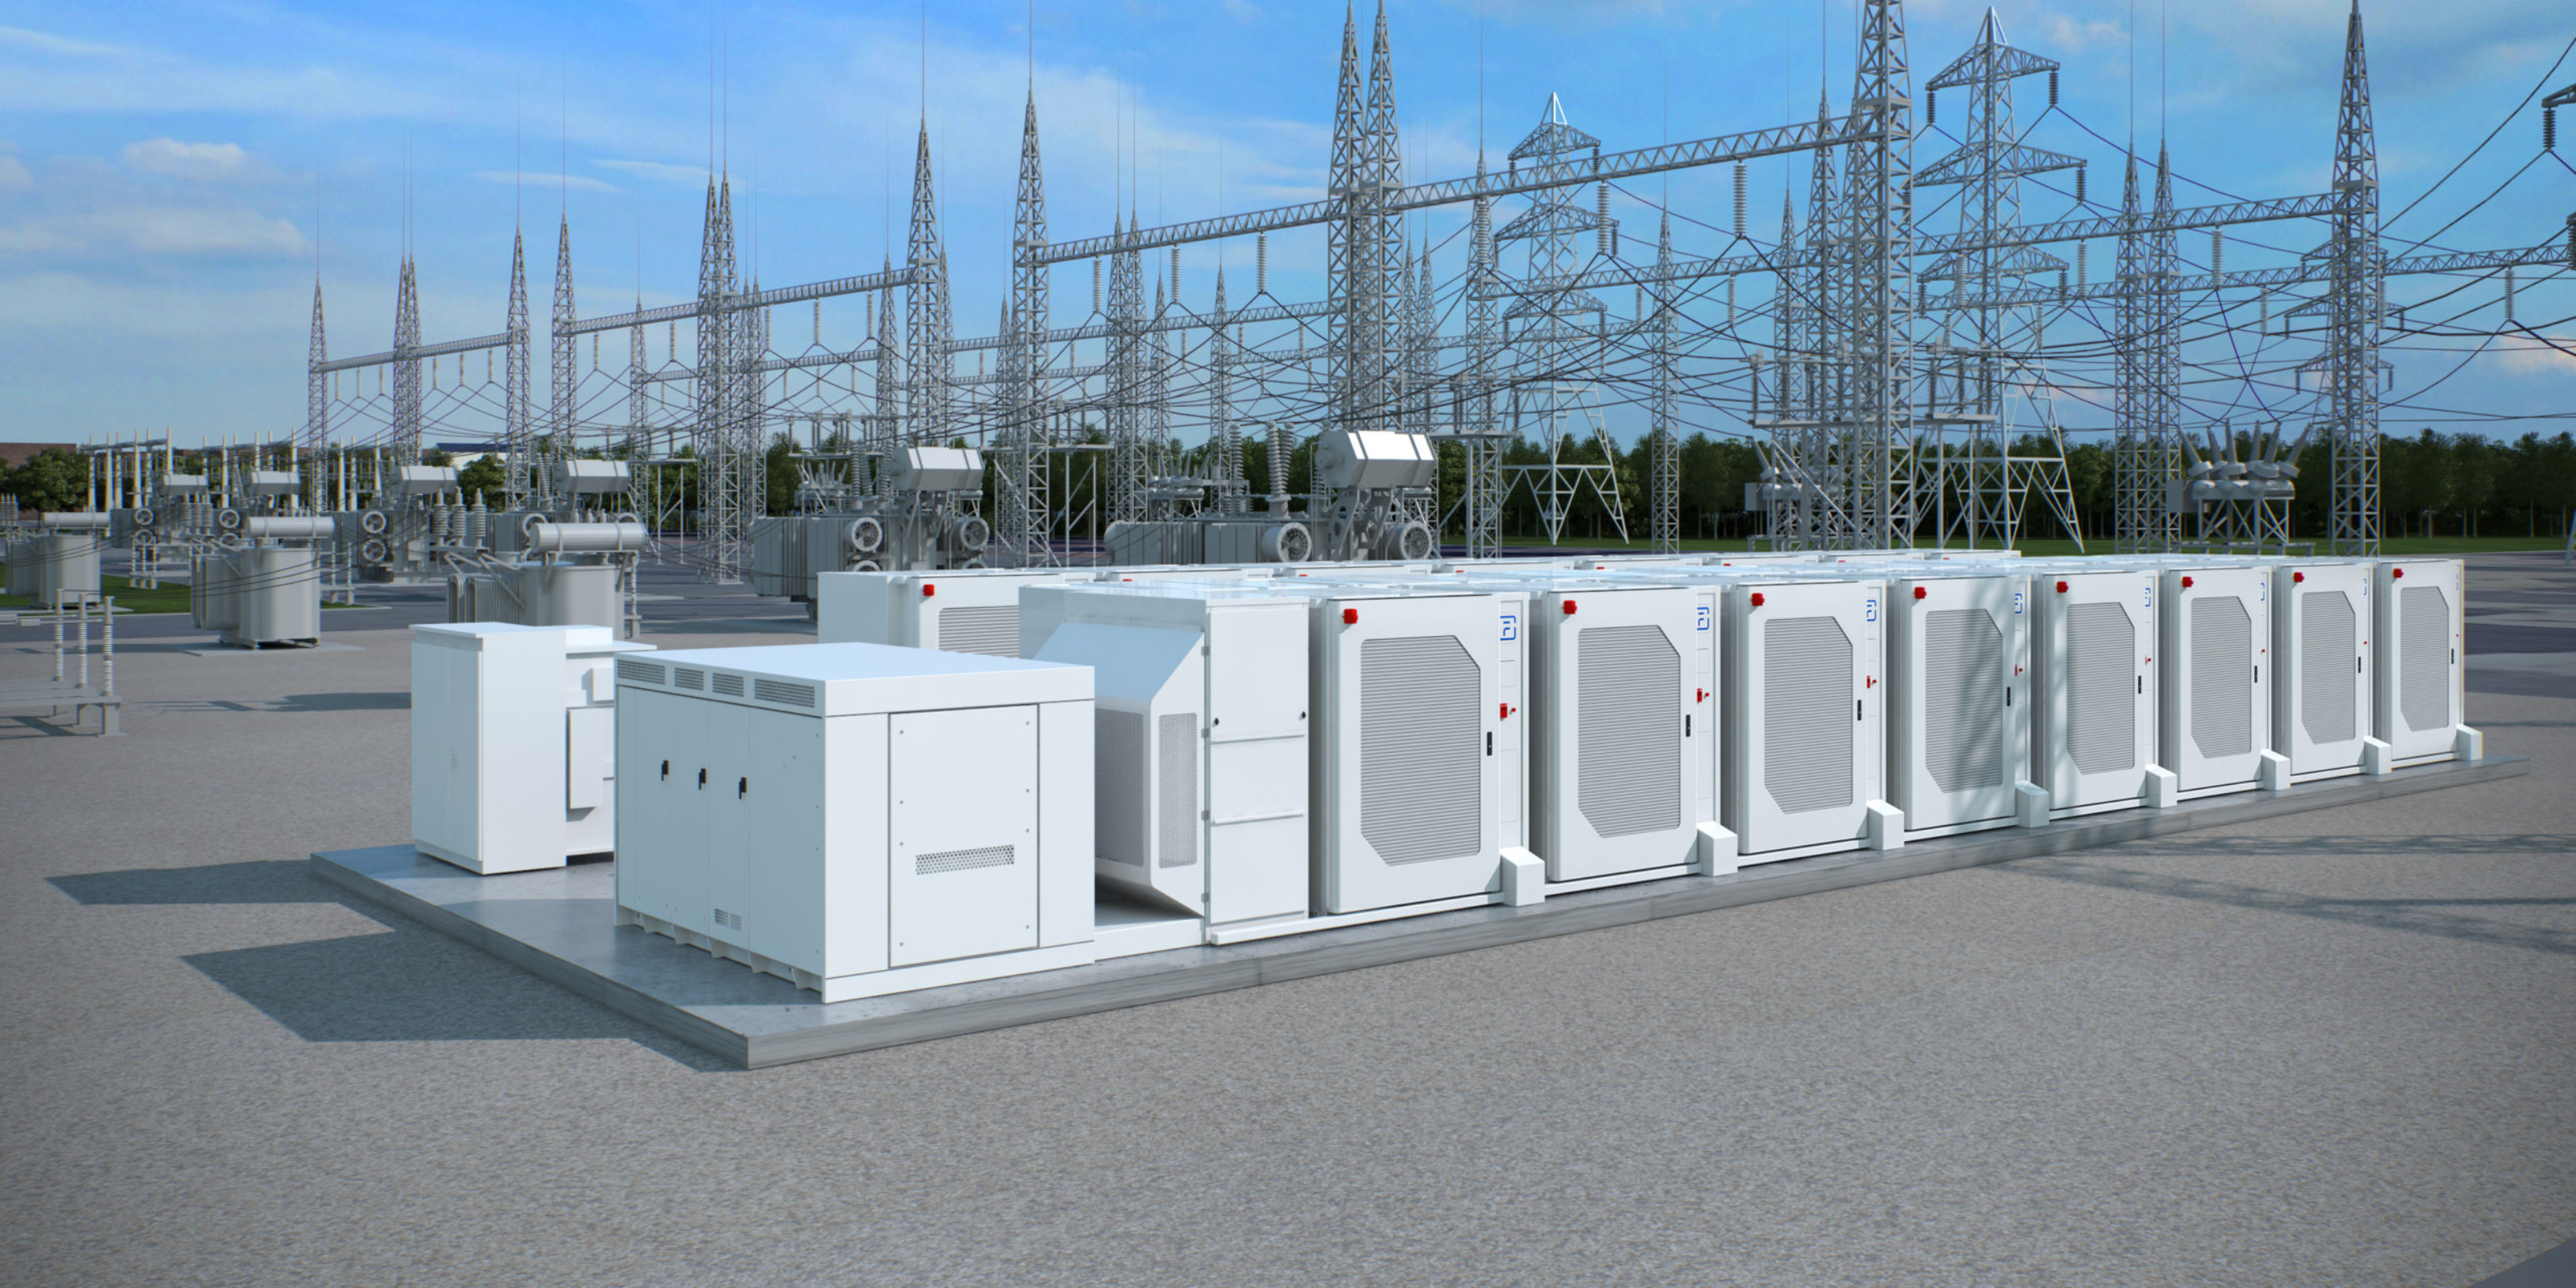 A professional-grade, large-energy storage system featuring lithium-ion batteries designed for commercial use, highlighting customized battery solutions.